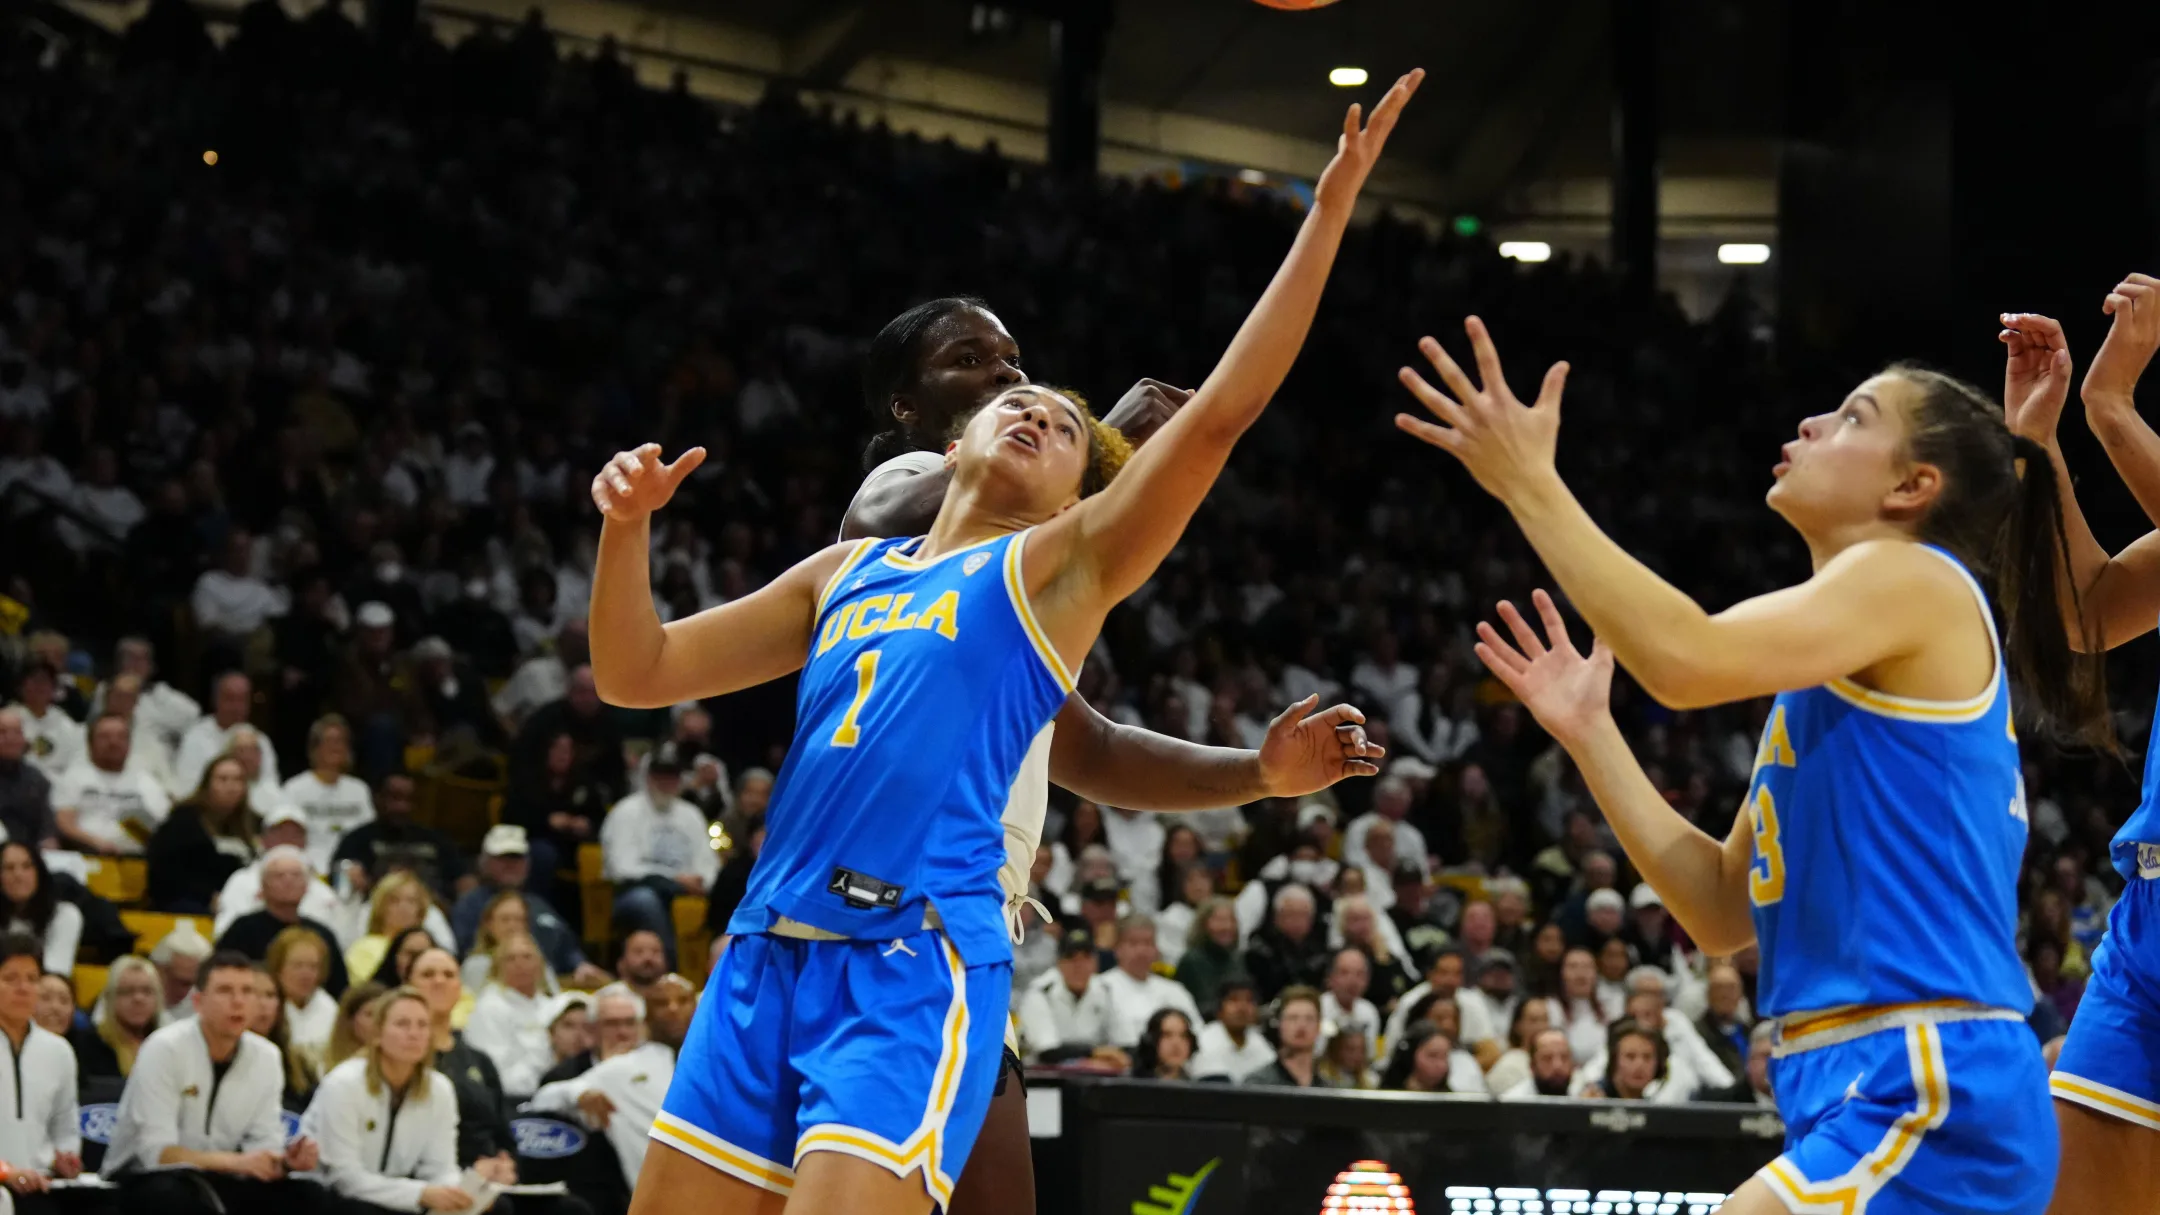 UCLA Women’s Basketball: Bruins Star Pays it Forward with NIL Deal Earnings